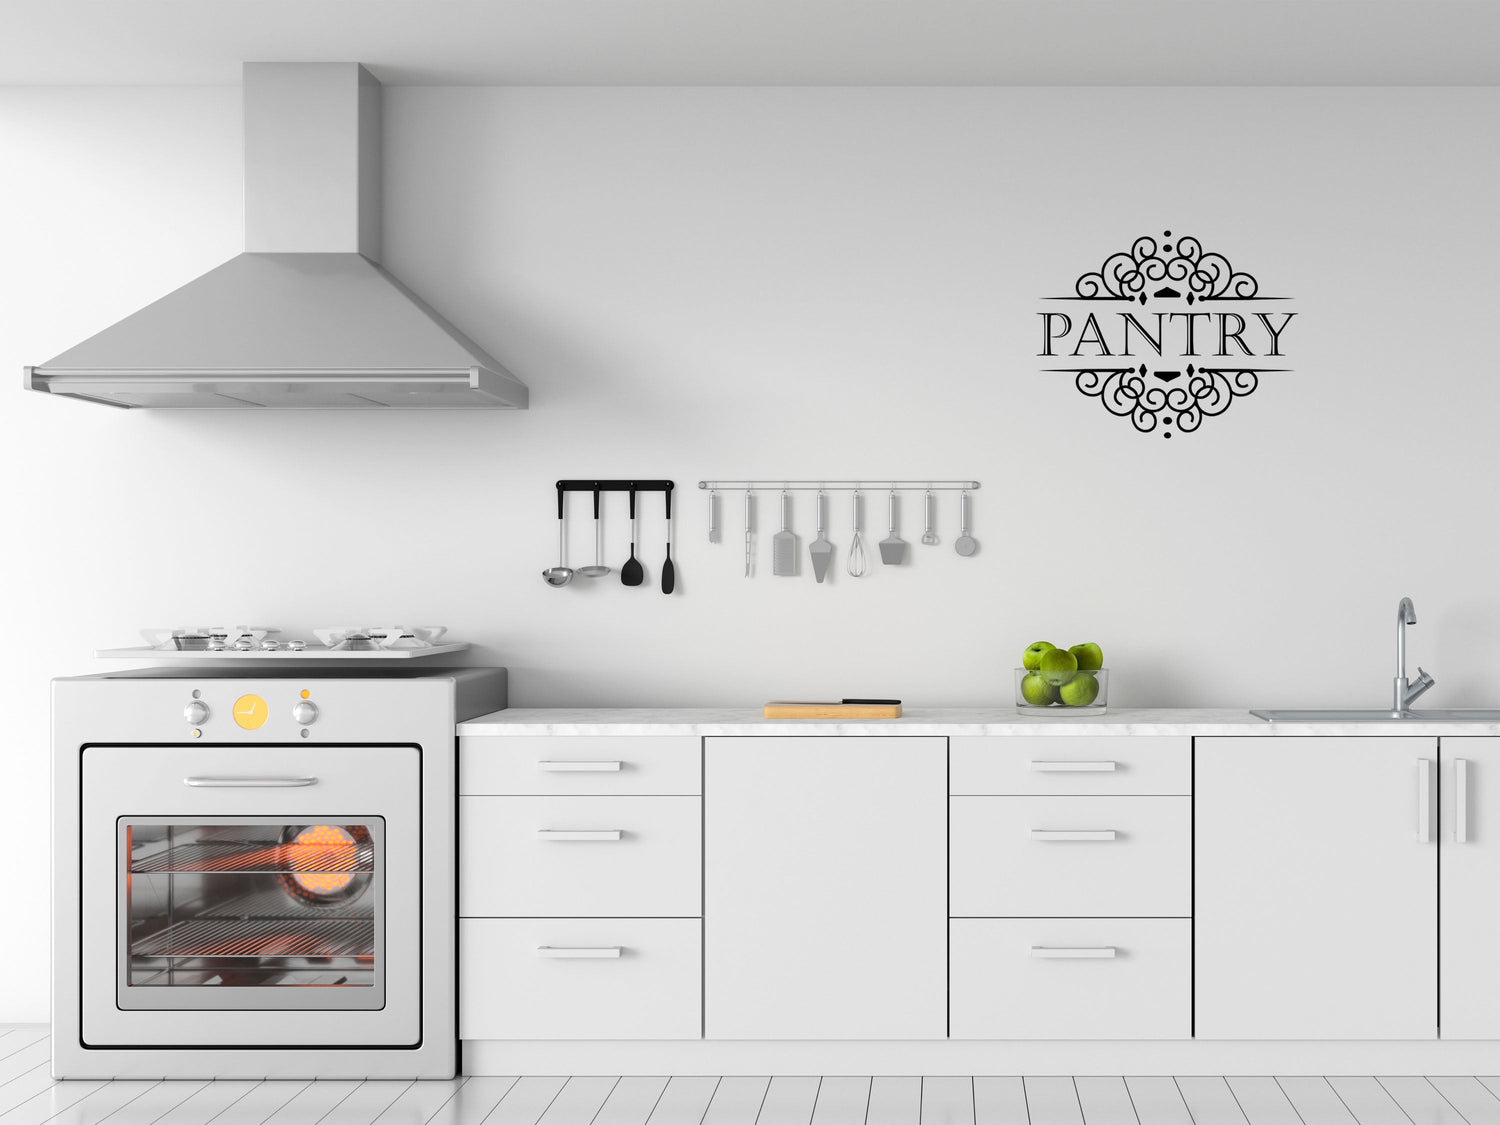 Pantry - Inspirational Wall Decals Vinyl Wall Decal Inspirational Wall Signs 